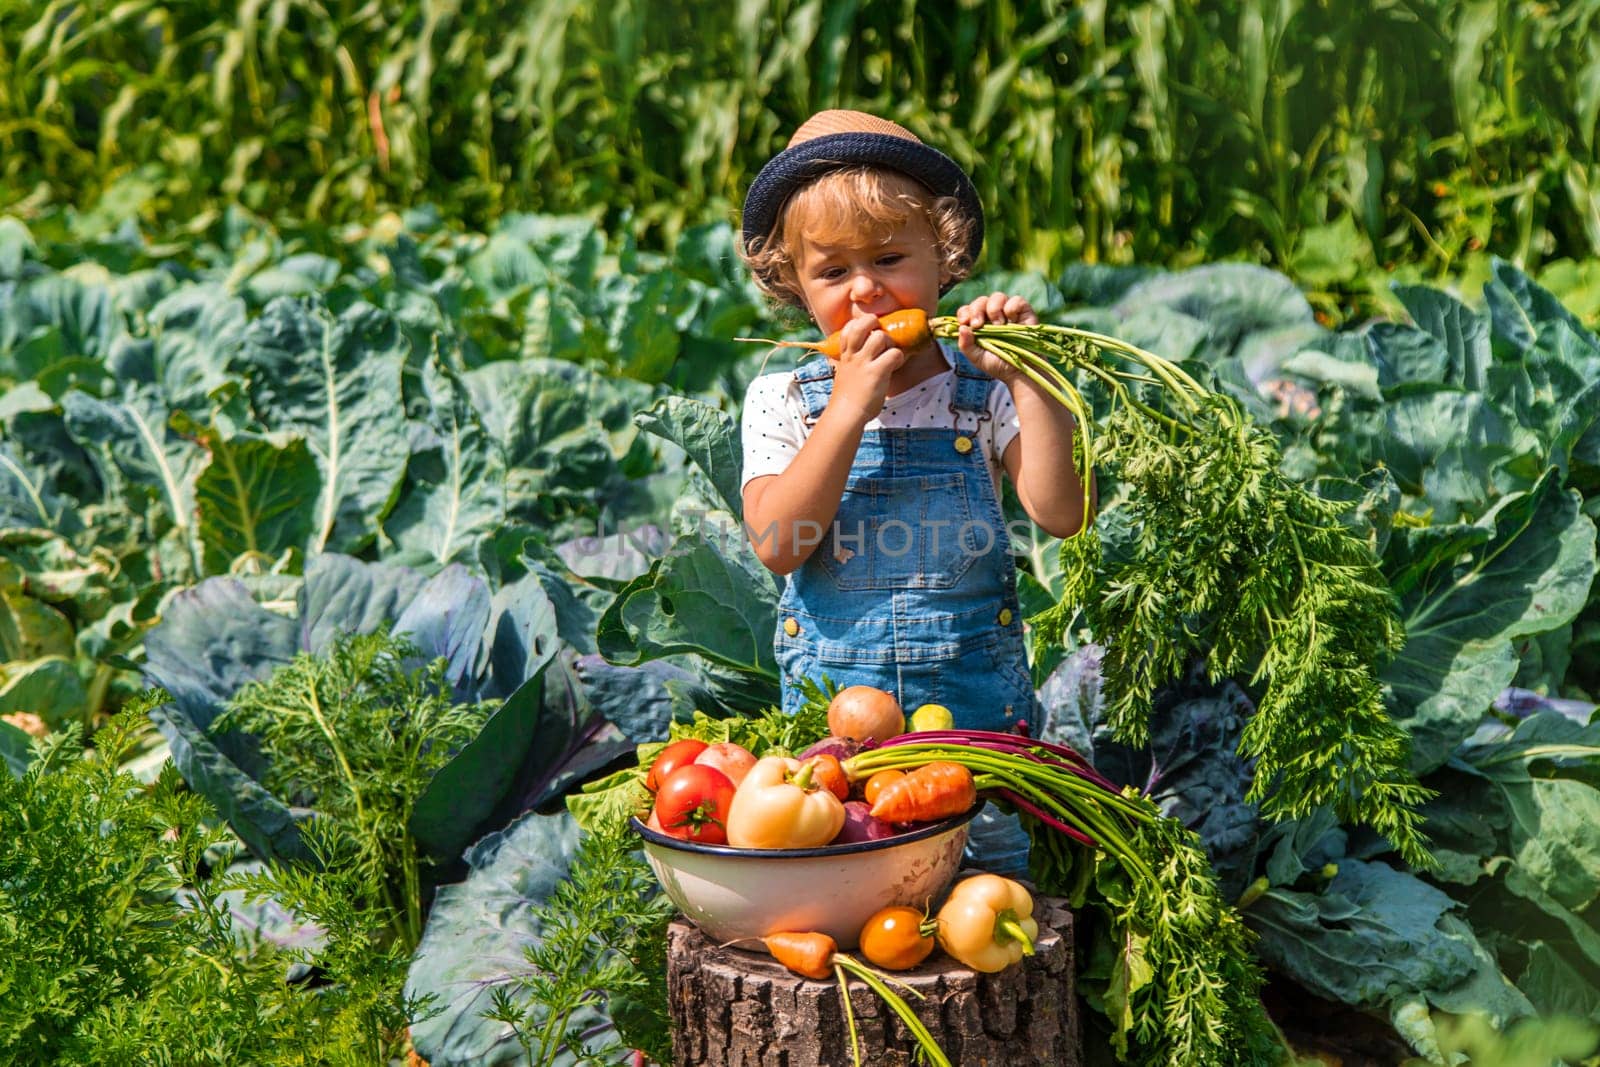 A child harvests vegetables in the garden. Selective focus. Food.